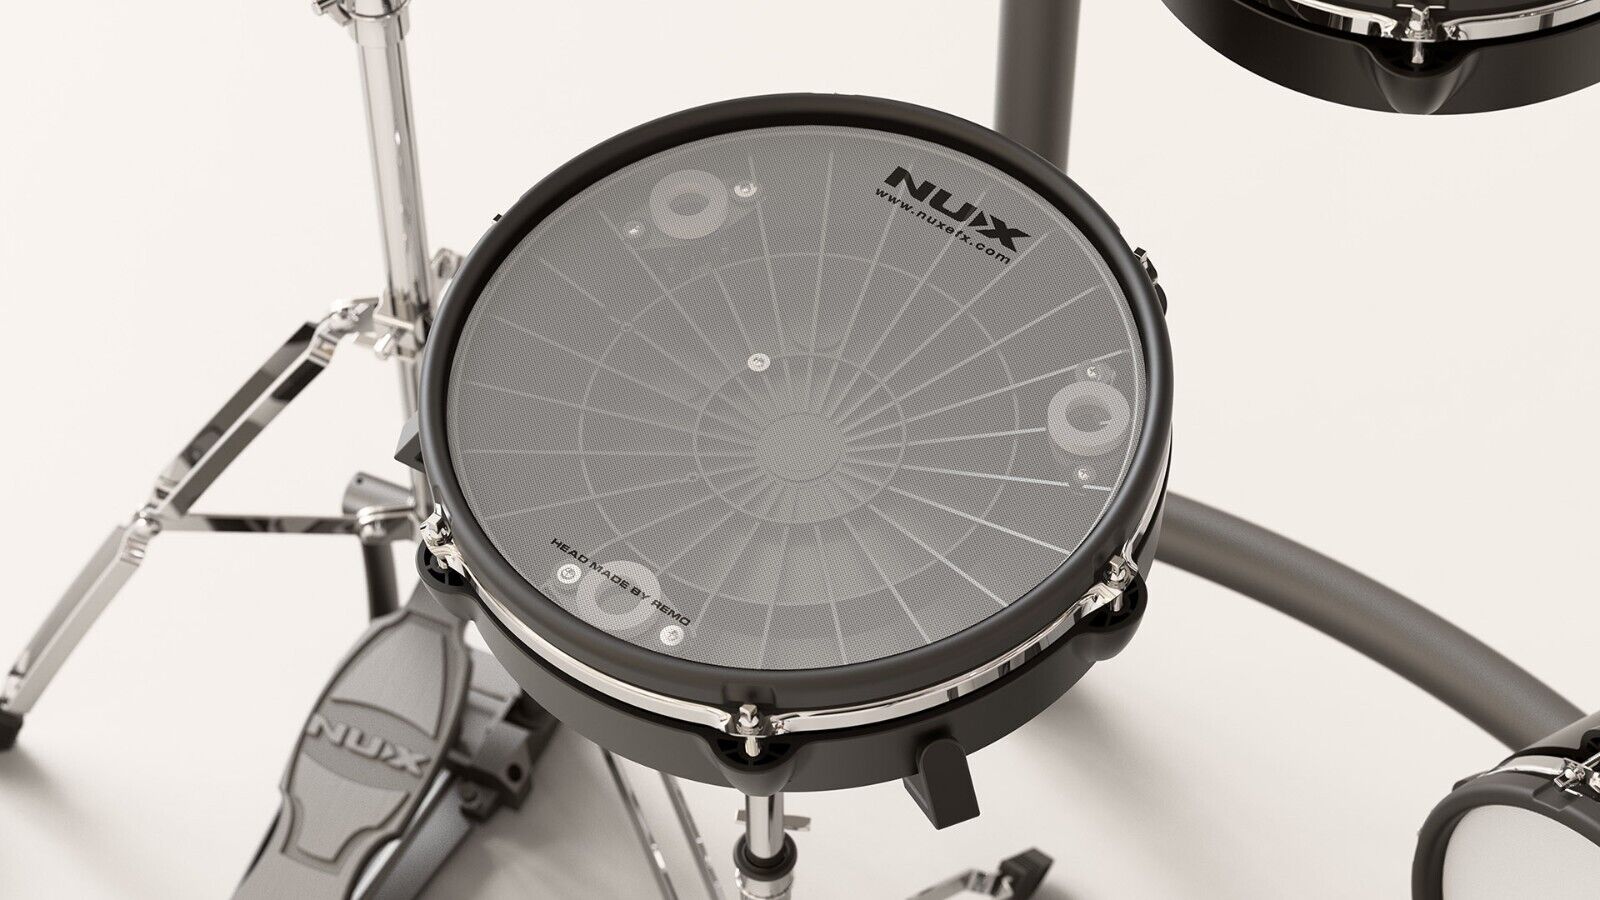 Newest! Nux DM8 all REMO Mesh head digital drum 9-Pieces Electronic Drum 12